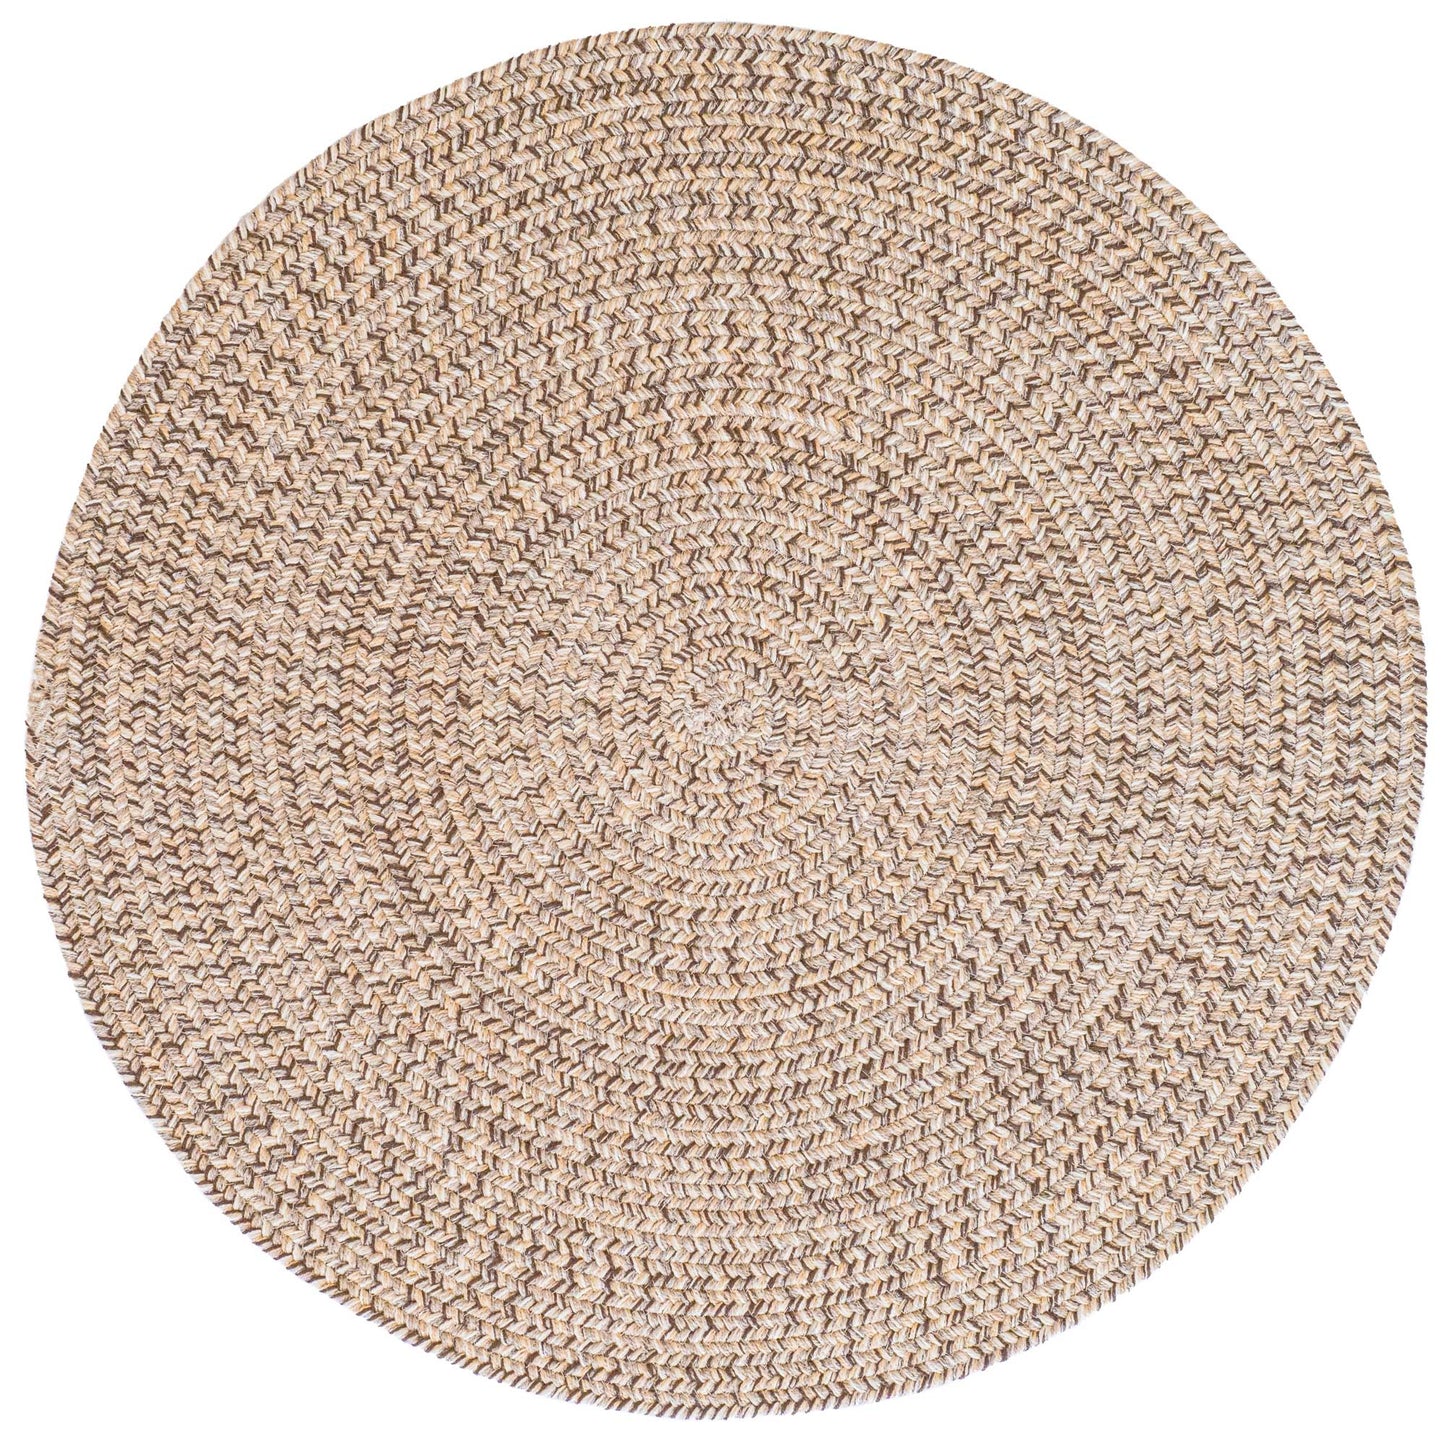 Stockton Synthetic Blend Indoor Area Rug by Capel Rugs | Area Rug